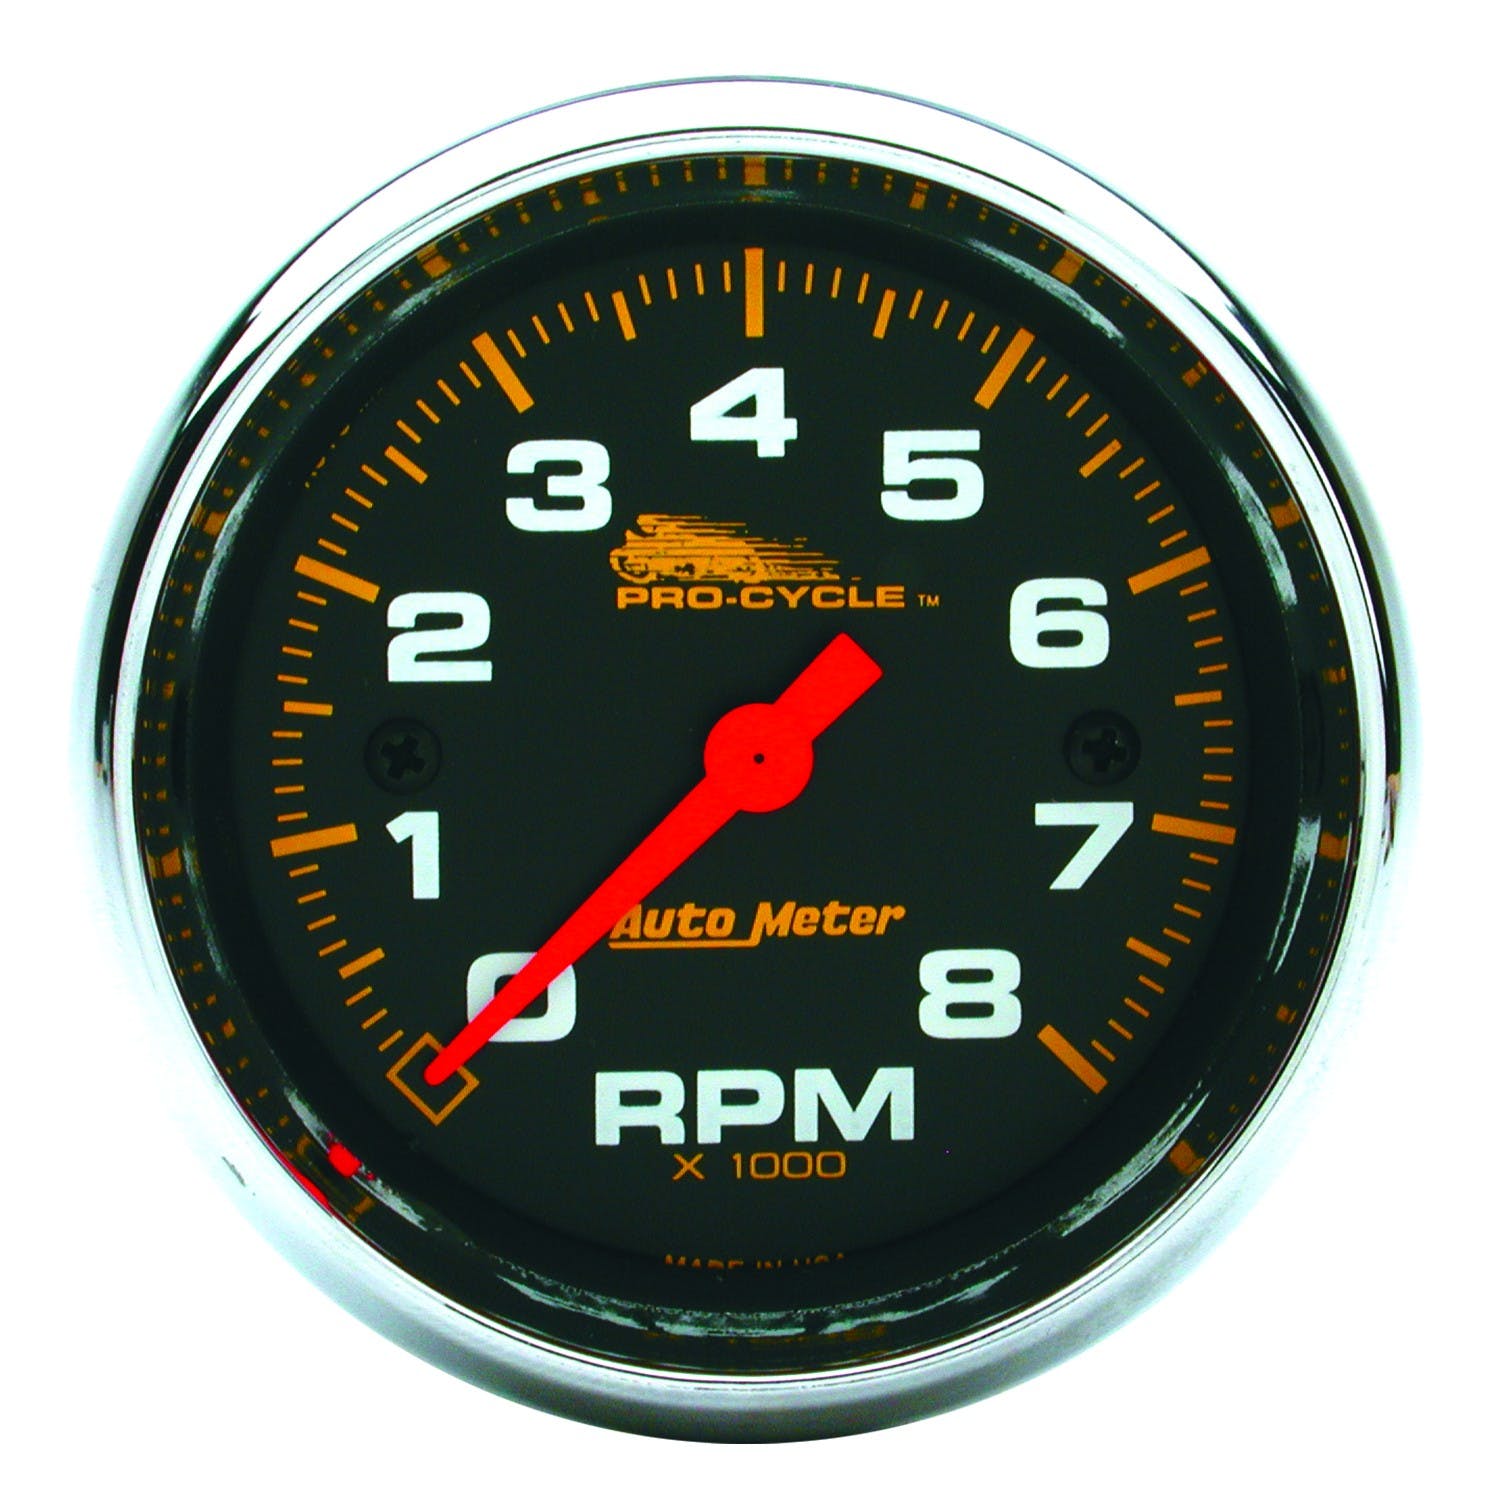 AutoMeter Products 19304 Tachometer Gauge, Black-Pro Cycle 2 5/8, 8K RPM, 2and4 Cylinder